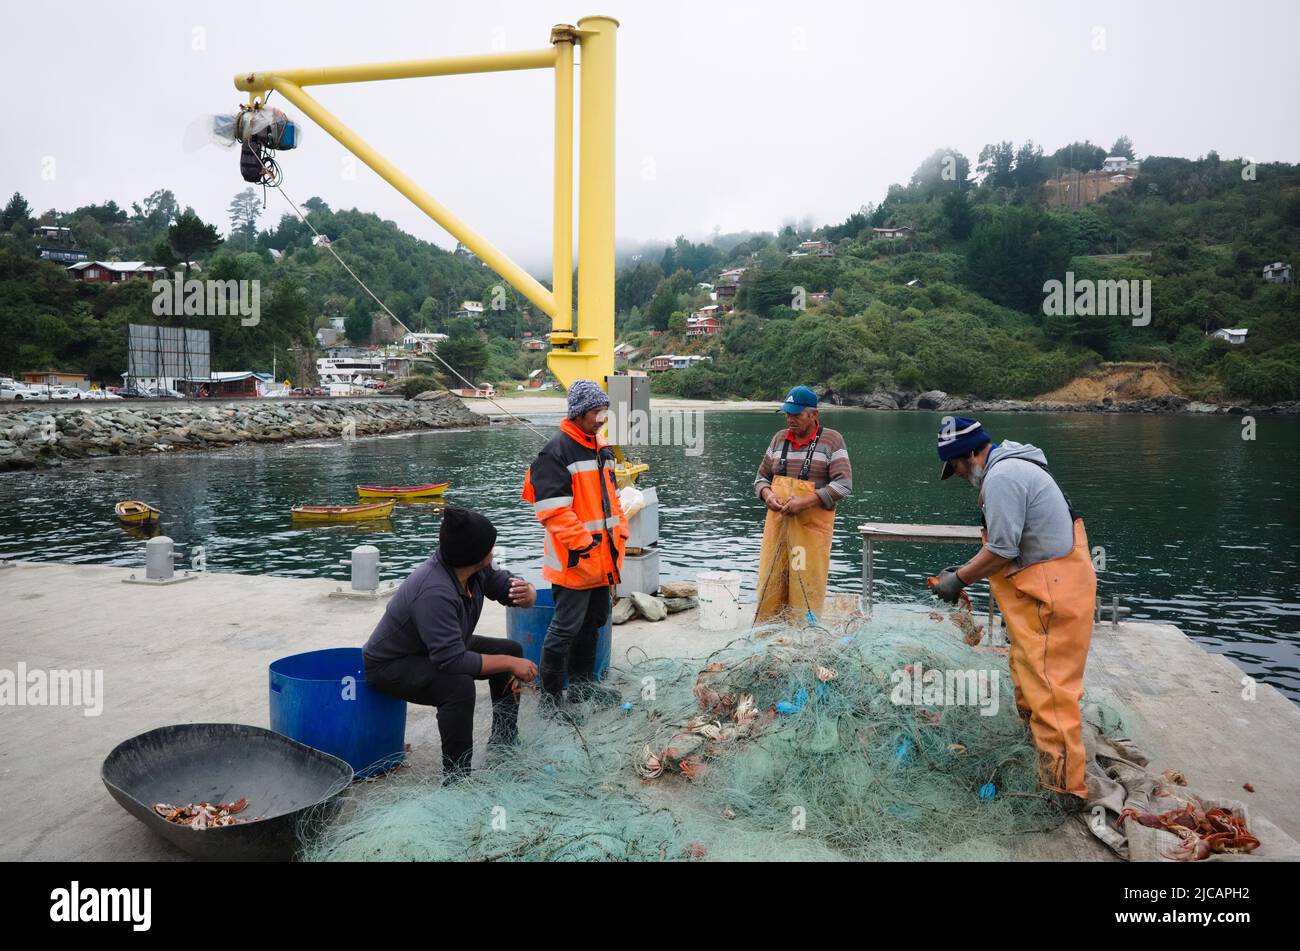 Bahia Mansa, Chile - February, 2020: Fishermen take out catch from fishing net on pier in ocean bay surrounded by green hills. Fishermen in waterproof Stock Photo